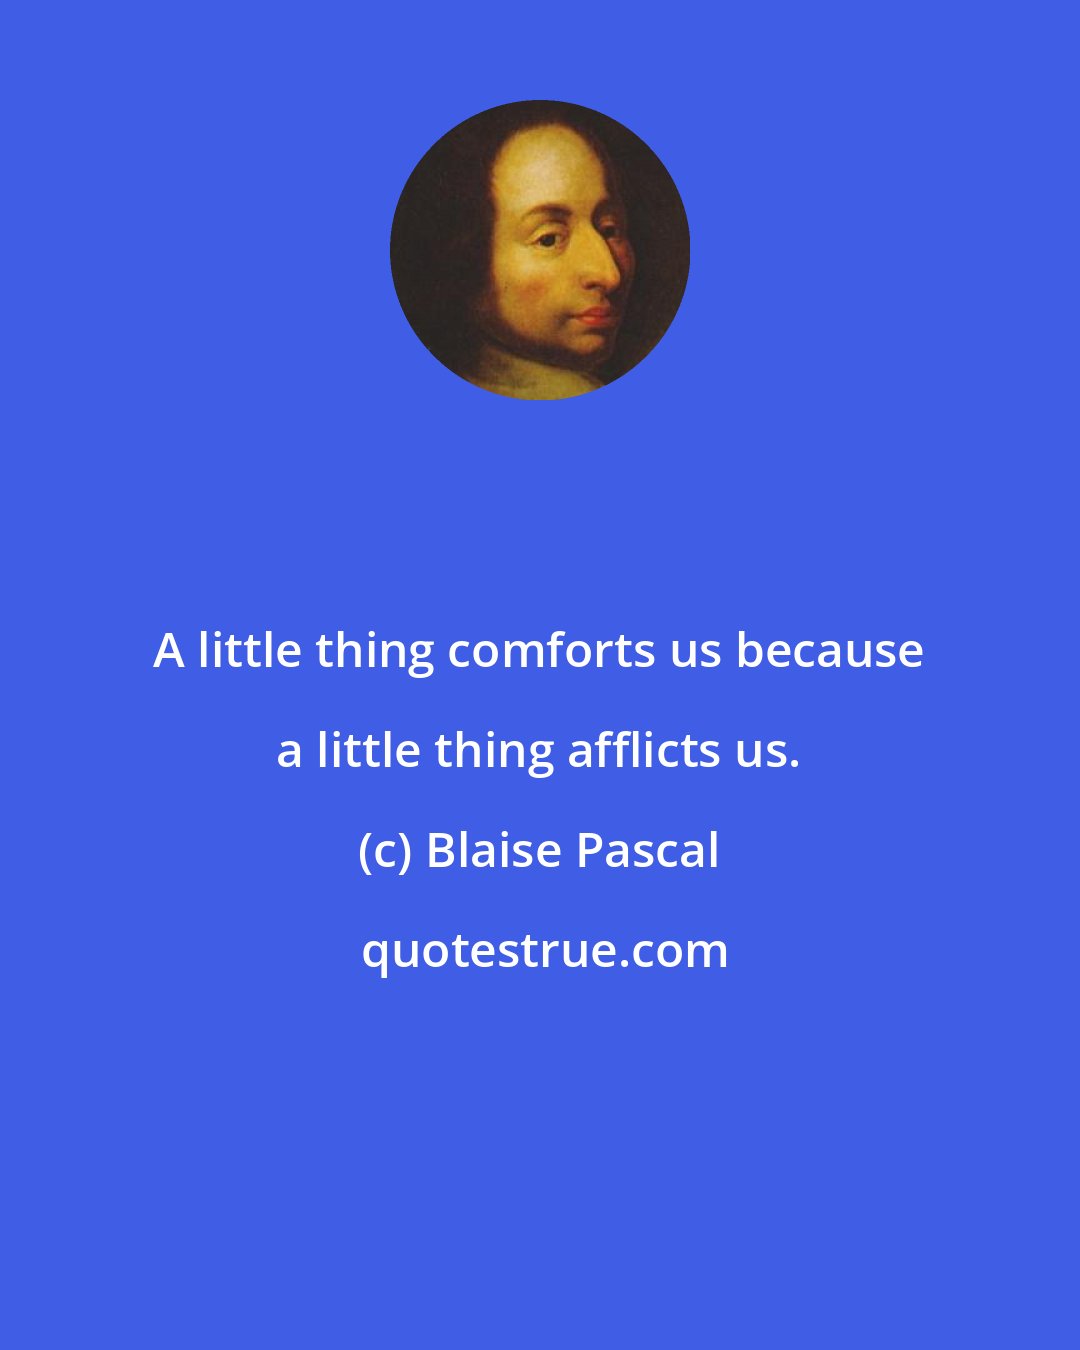 Blaise Pascal: A little thing comforts us because a little thing afflicts us.